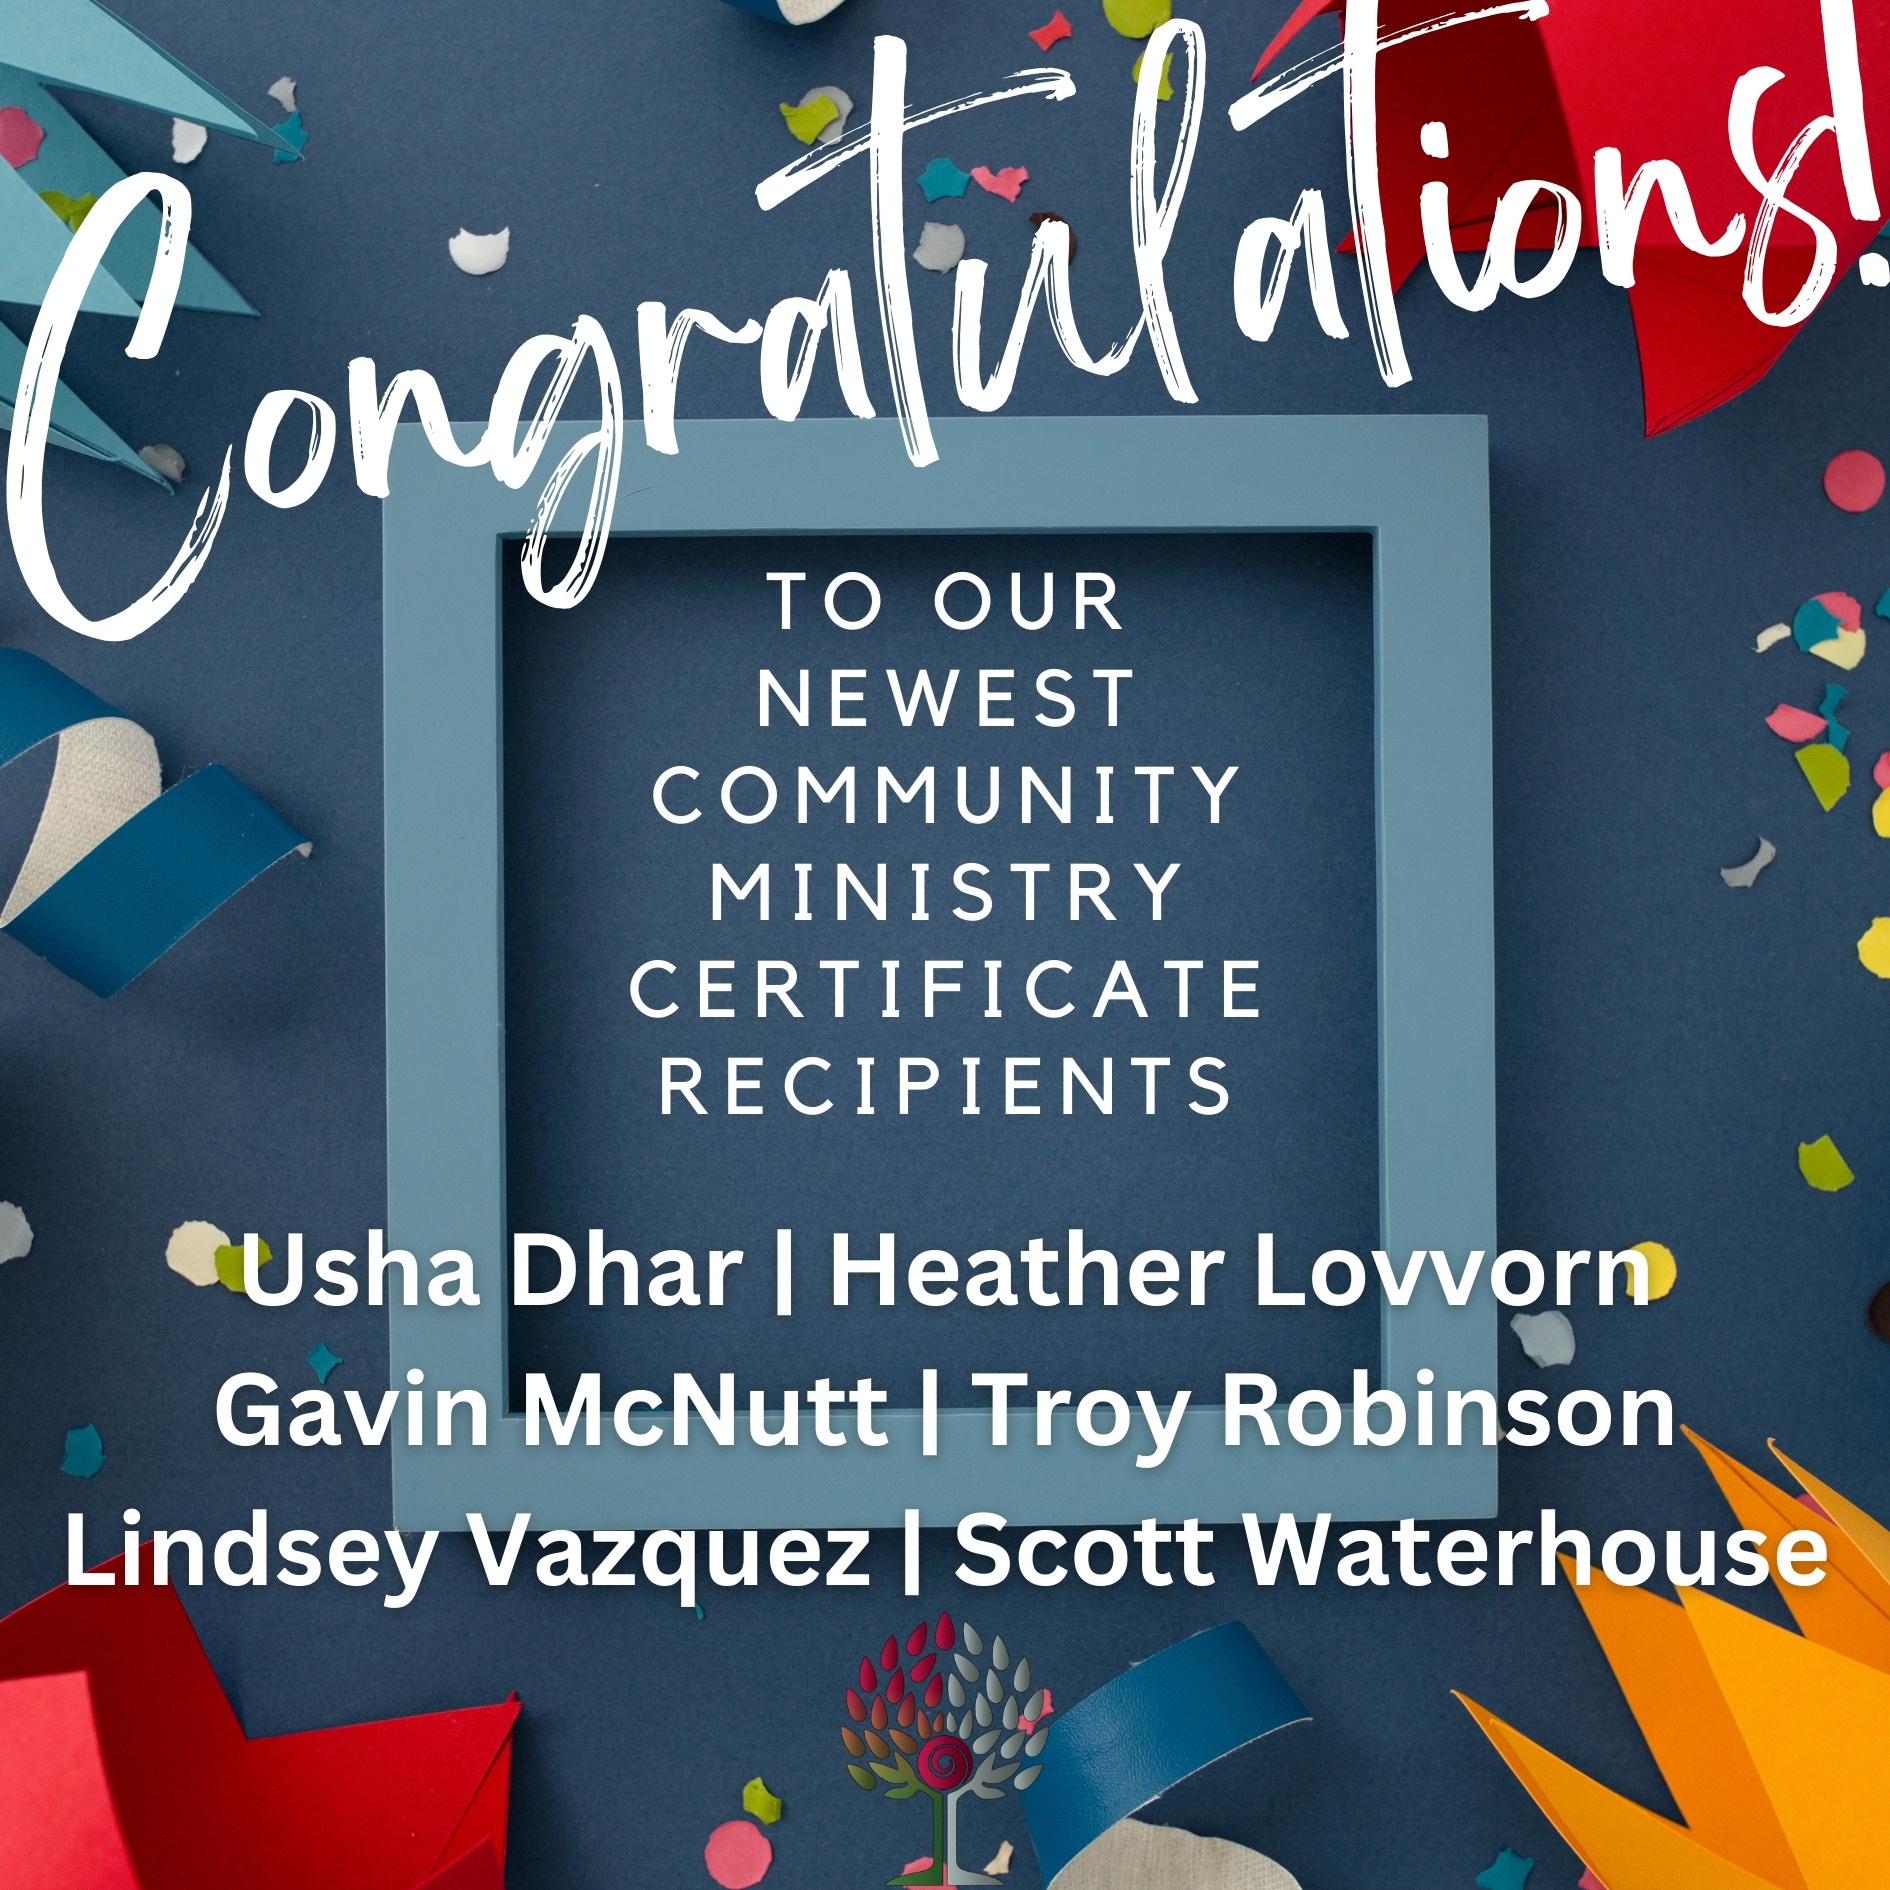 Congratulations to our newest Community Ministry Certificate graduates!